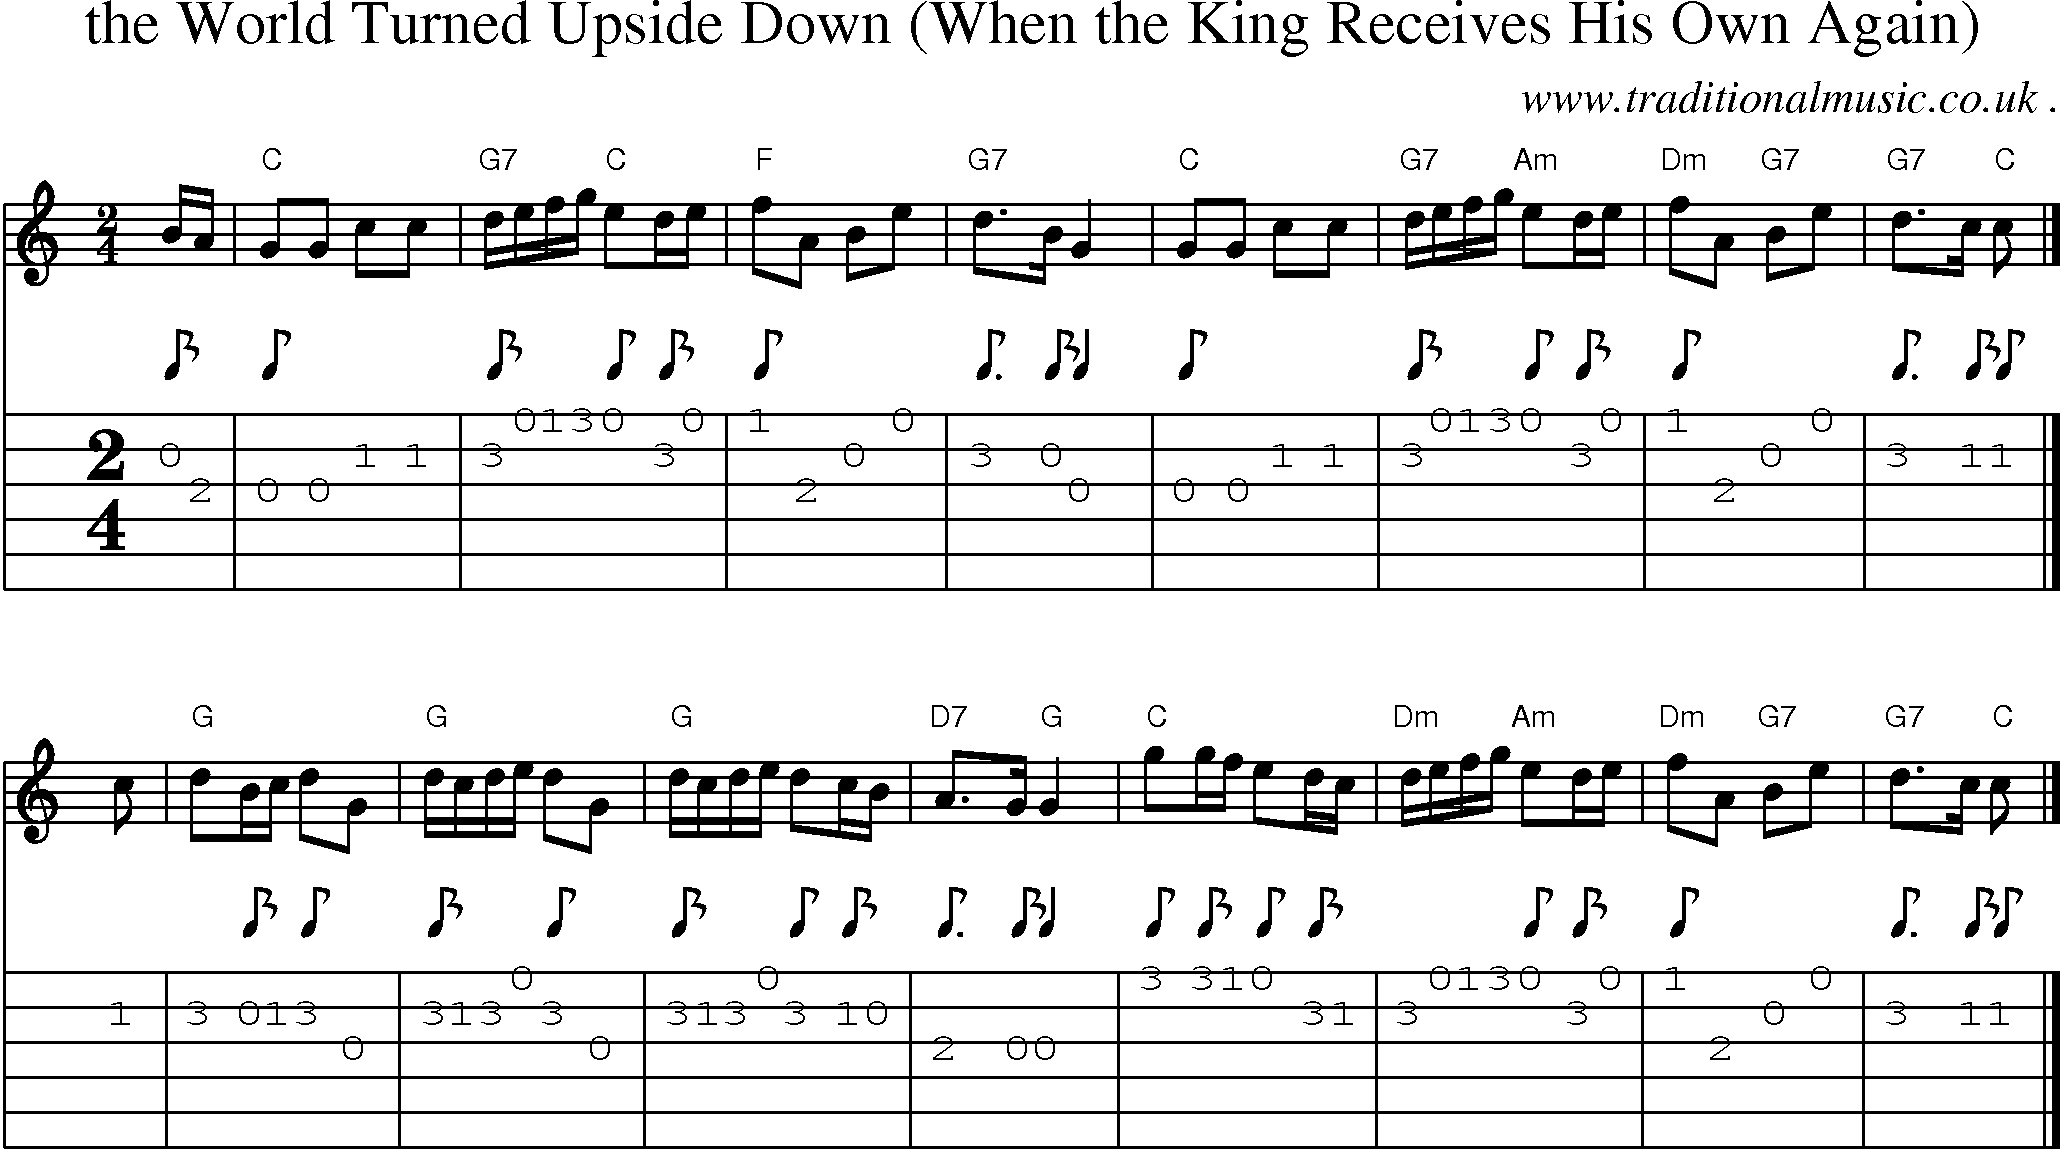 Sheet-music  score, Chords and Guitar Tabs for The World Turned Upside Down When The King Receives His Own Again